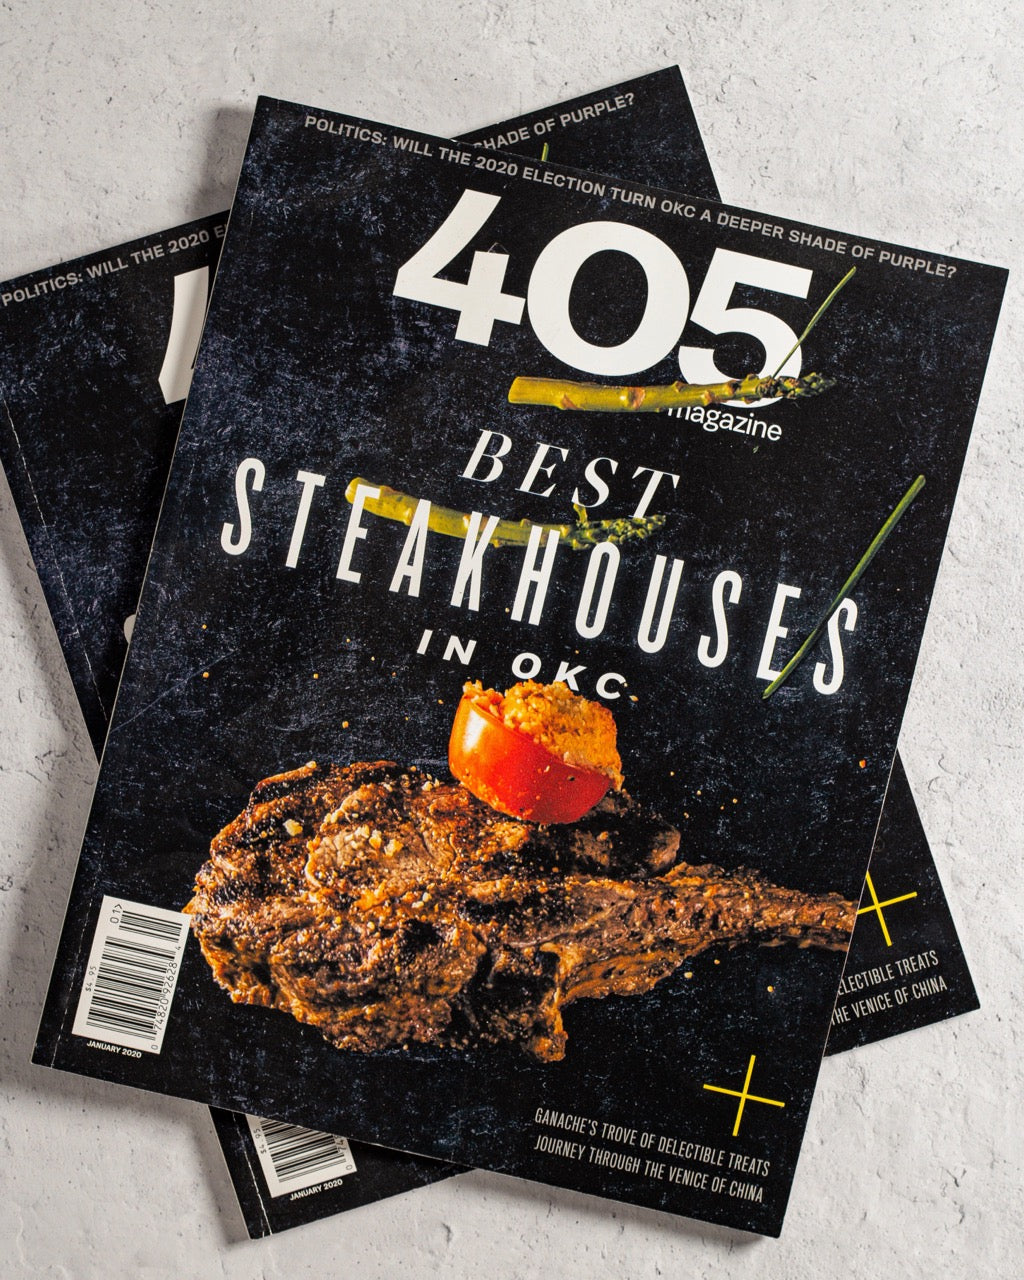 Food and beverage photographer lands first magazine cover